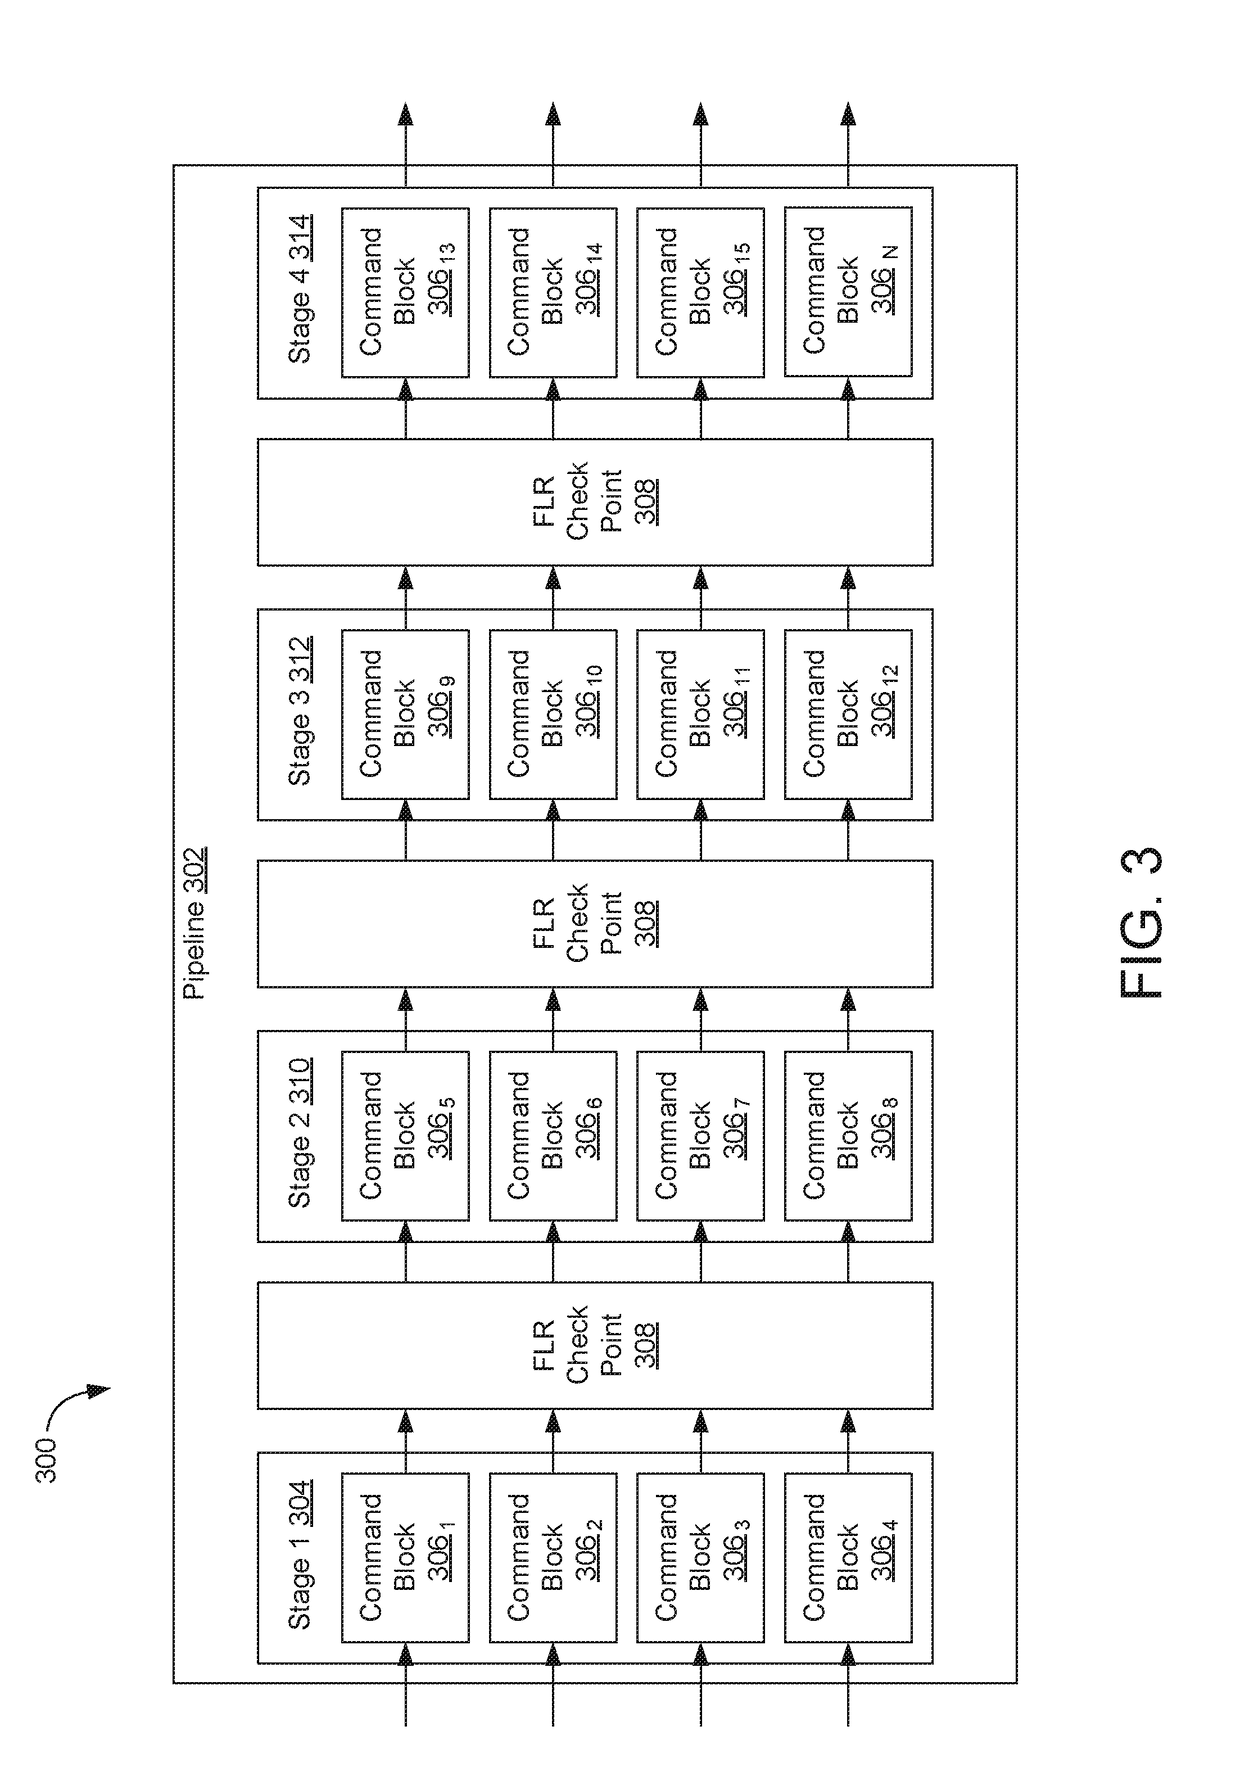 Managing function level reset in an io virtualization-enabled storage device